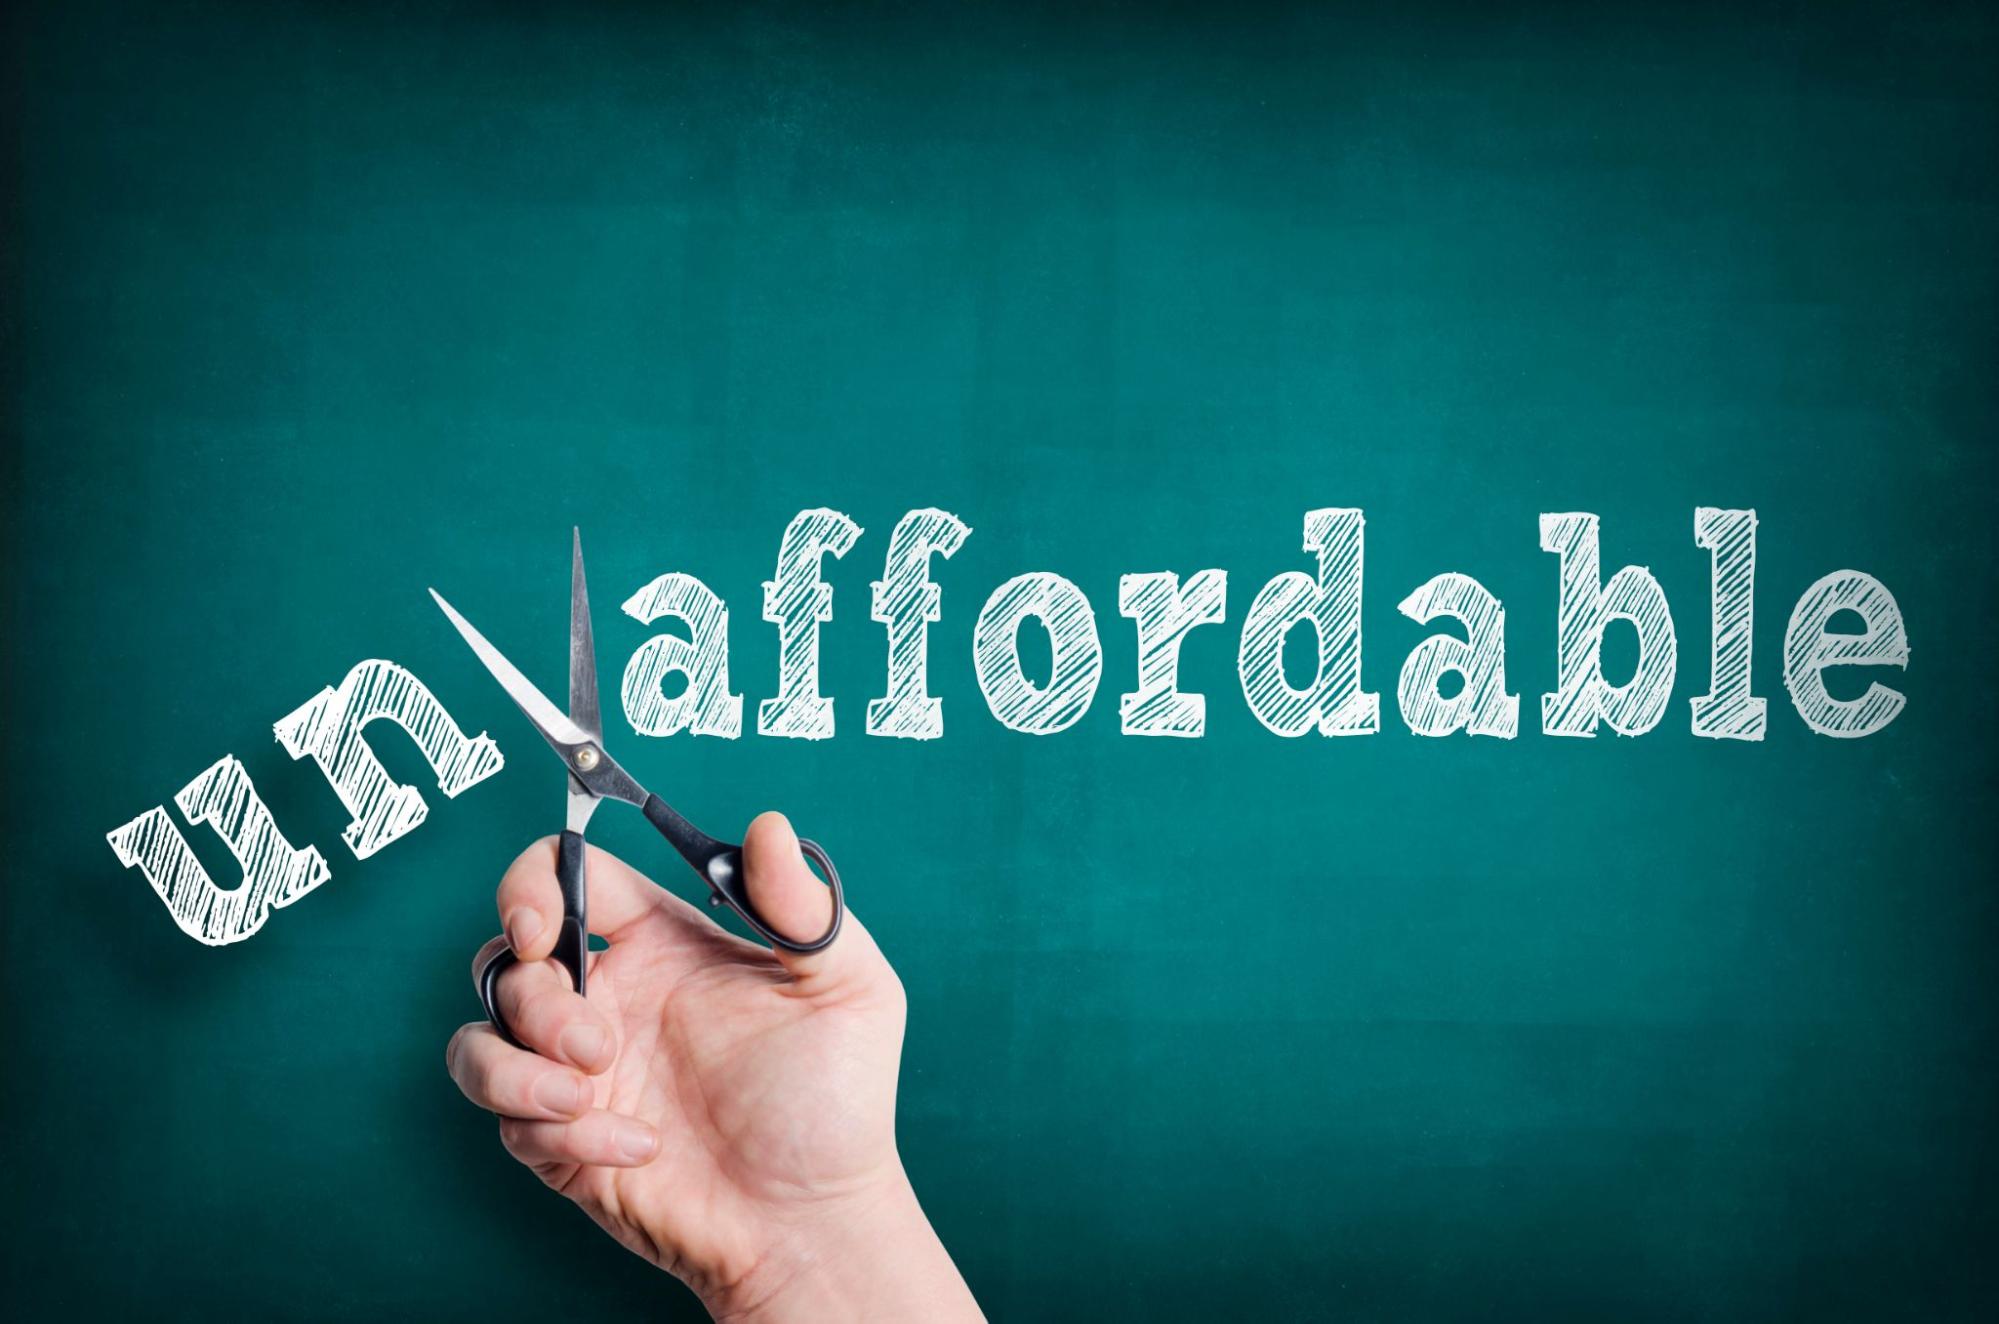 Hands holding scissors cutting "un" off of "affordable"